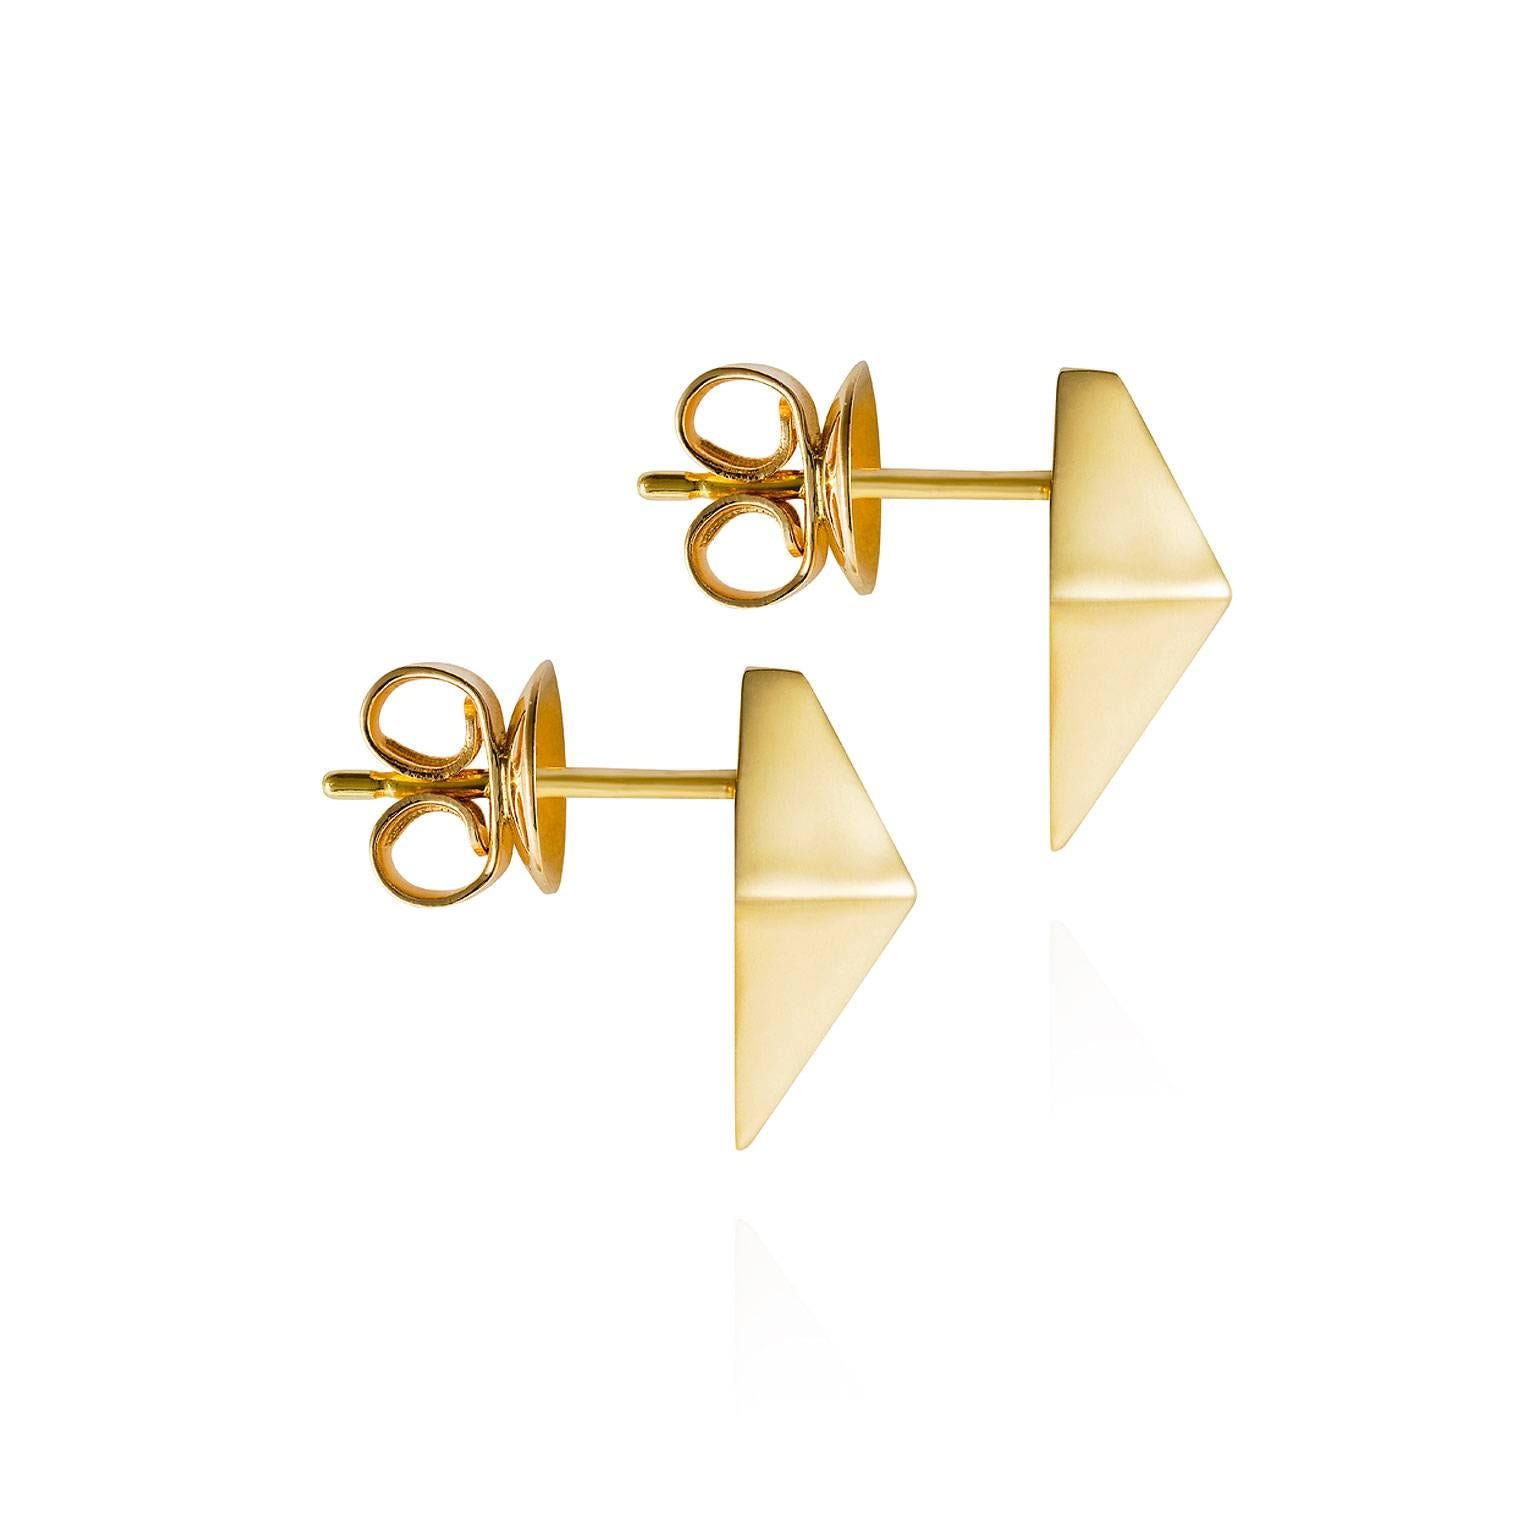 Defined by their clean edges these geometric thorn pyramid stud earrings are perfect for every day. 
Wear them with anything from a little black dress to more casual outfits.

Crafted in solid 18k yellow gold they come in a highly polished finish